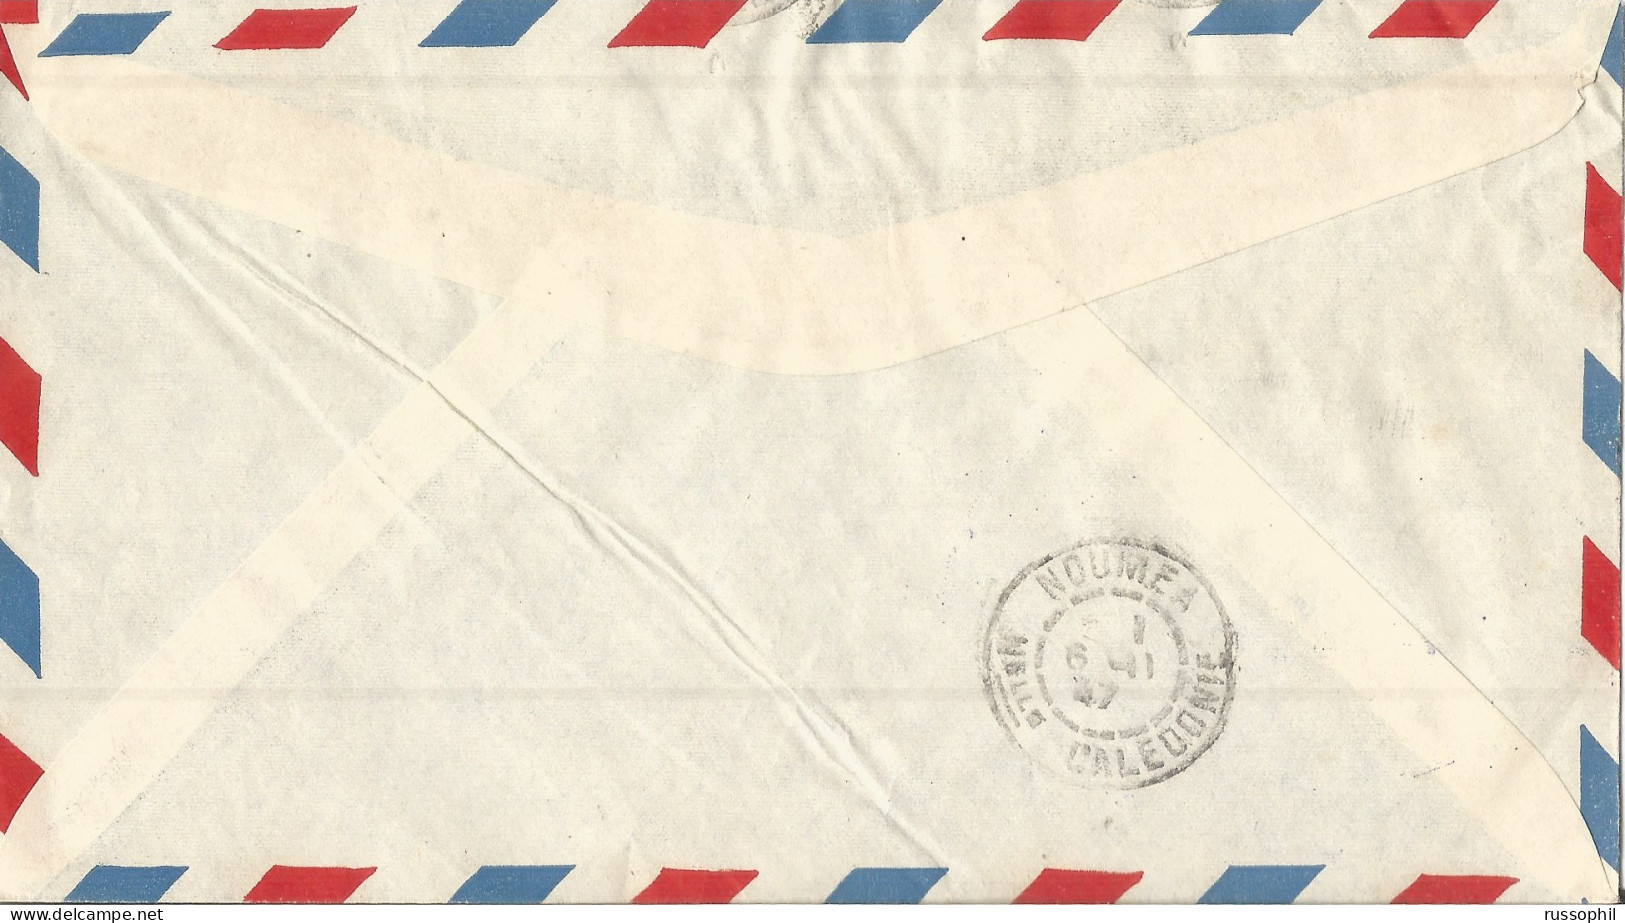 OCEANIE -  TRAPAS - 3 FR. FRANKING ON AIR COVER FROM PAPEETE TO NEW CALEDONIA - RETURNED TO SENDER - 1947 - Covers & Documents